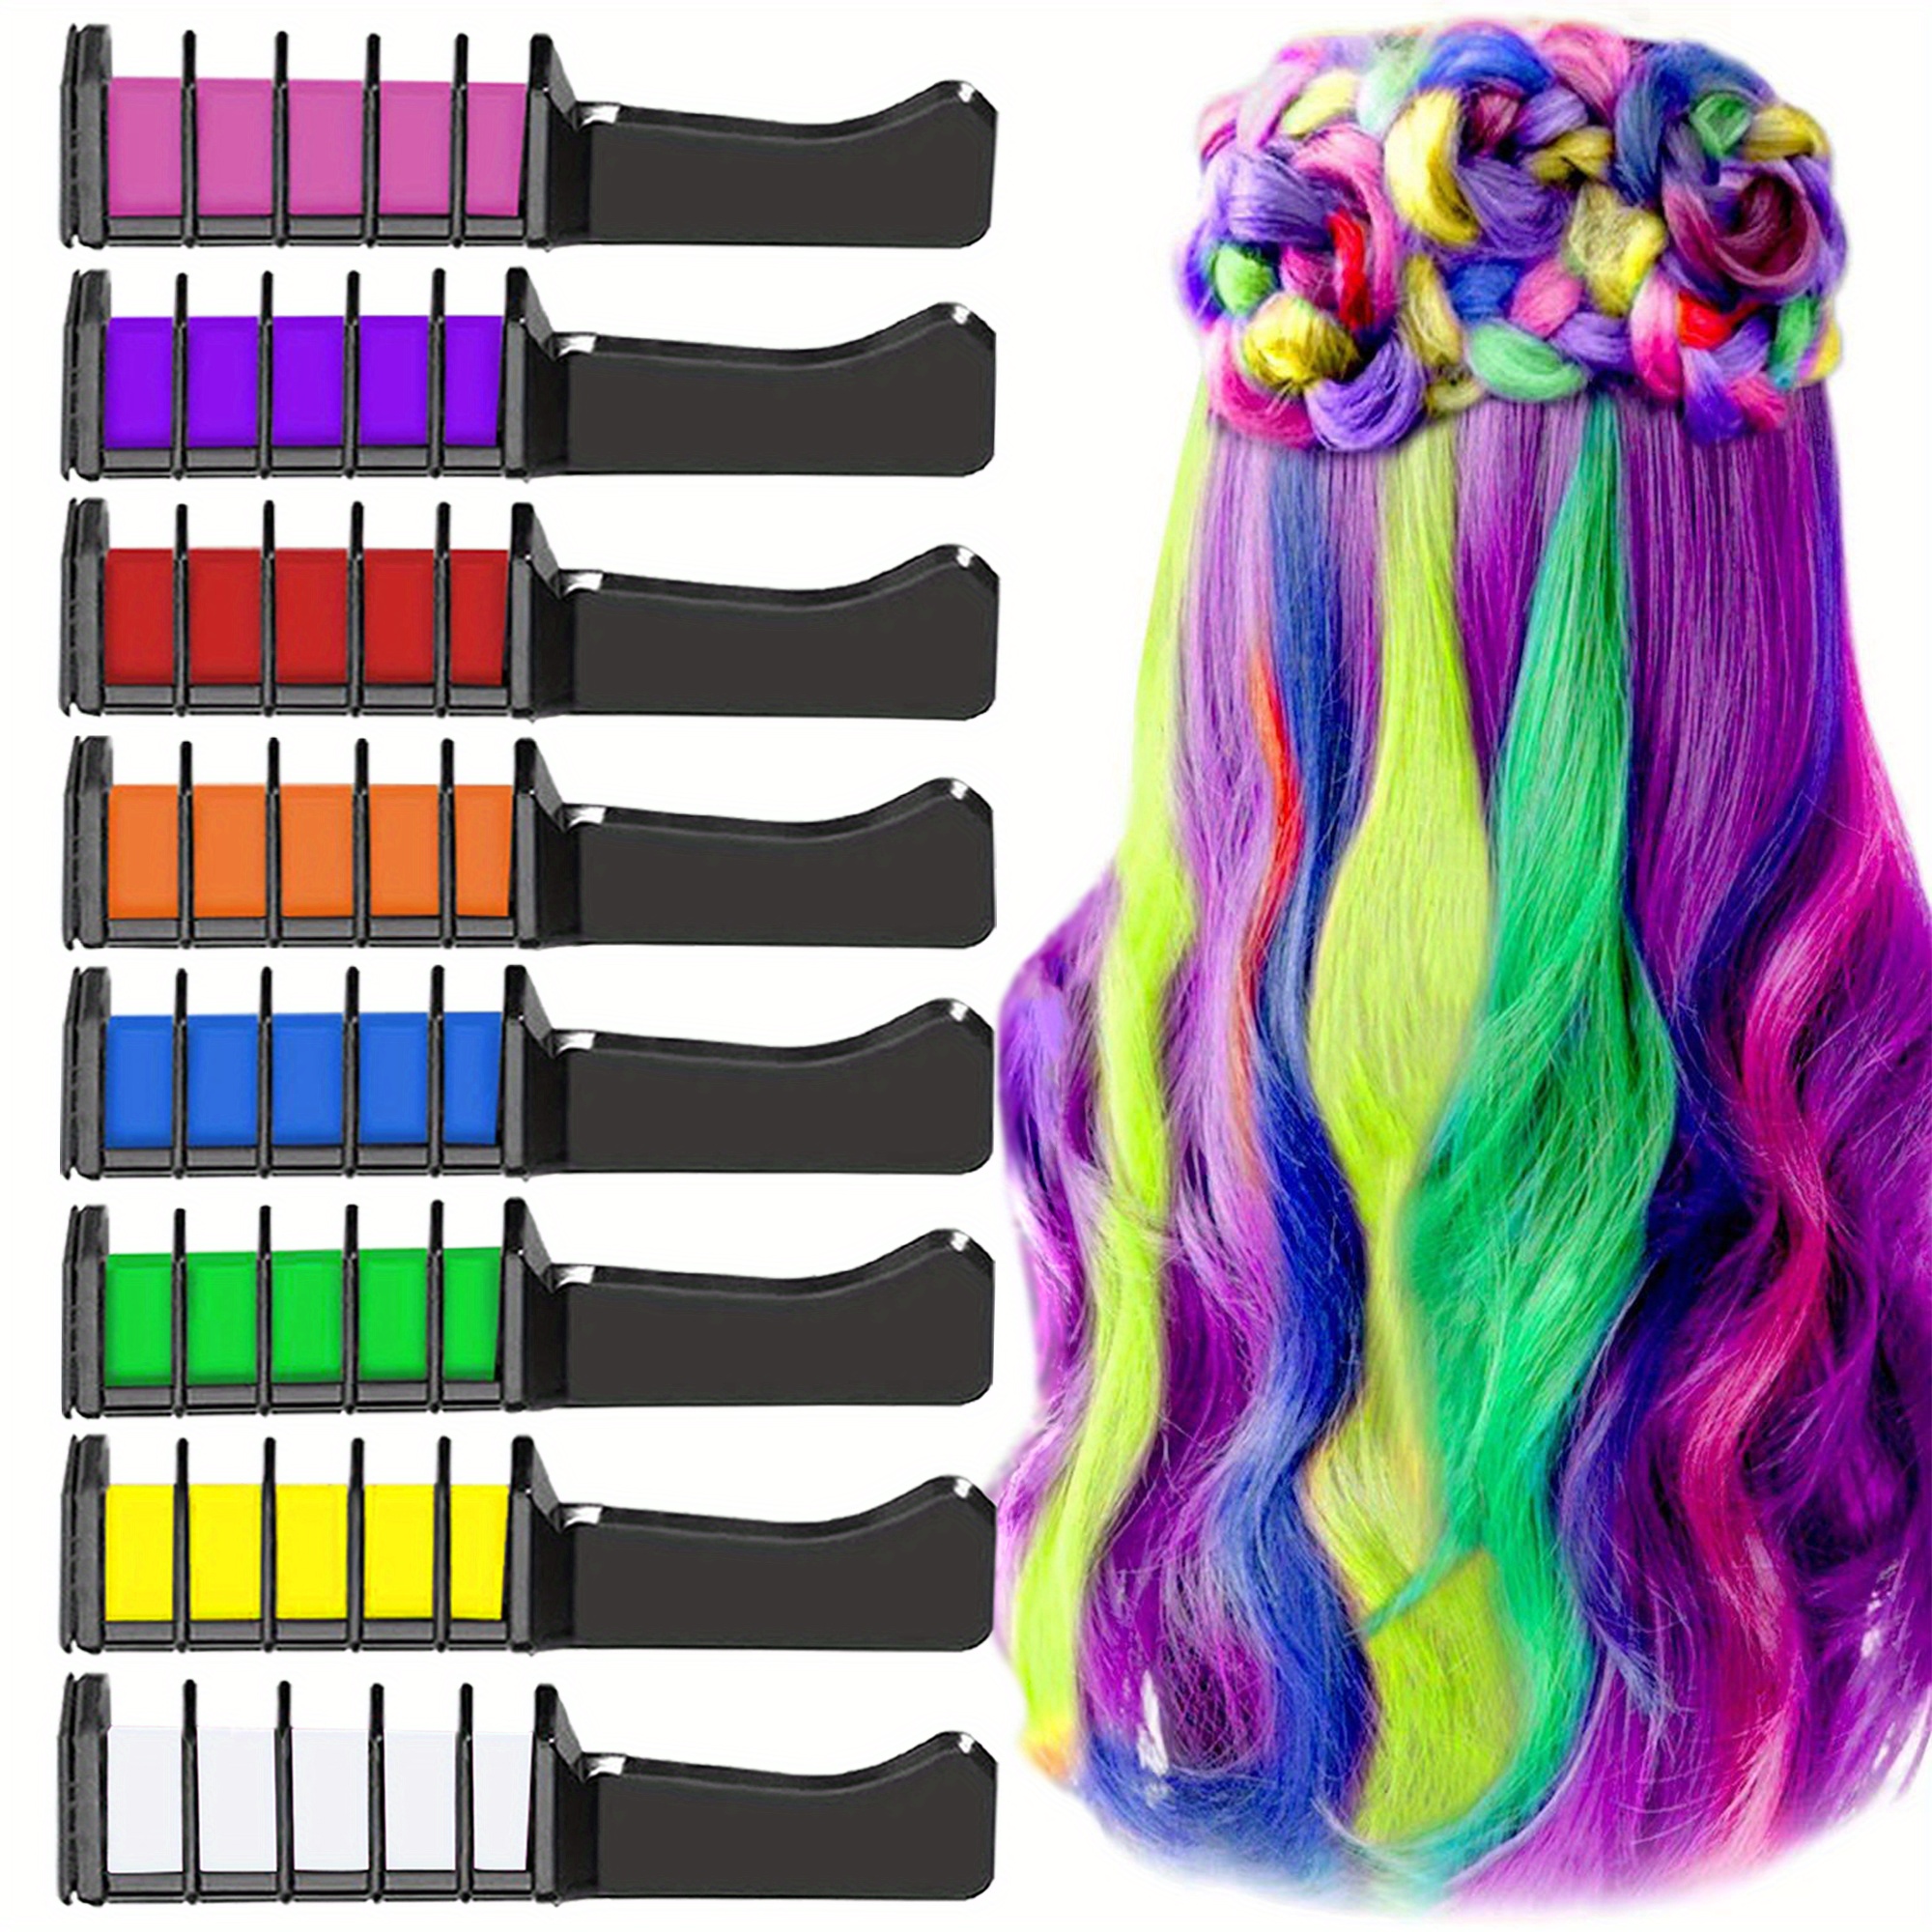 Makeup Kit - New Hair Chalk Comb Temporary Washable Hair Color Dy 10 Color  Hair Chalk for Girls - Hair Coloring & Dyes, Facebook Marketplace